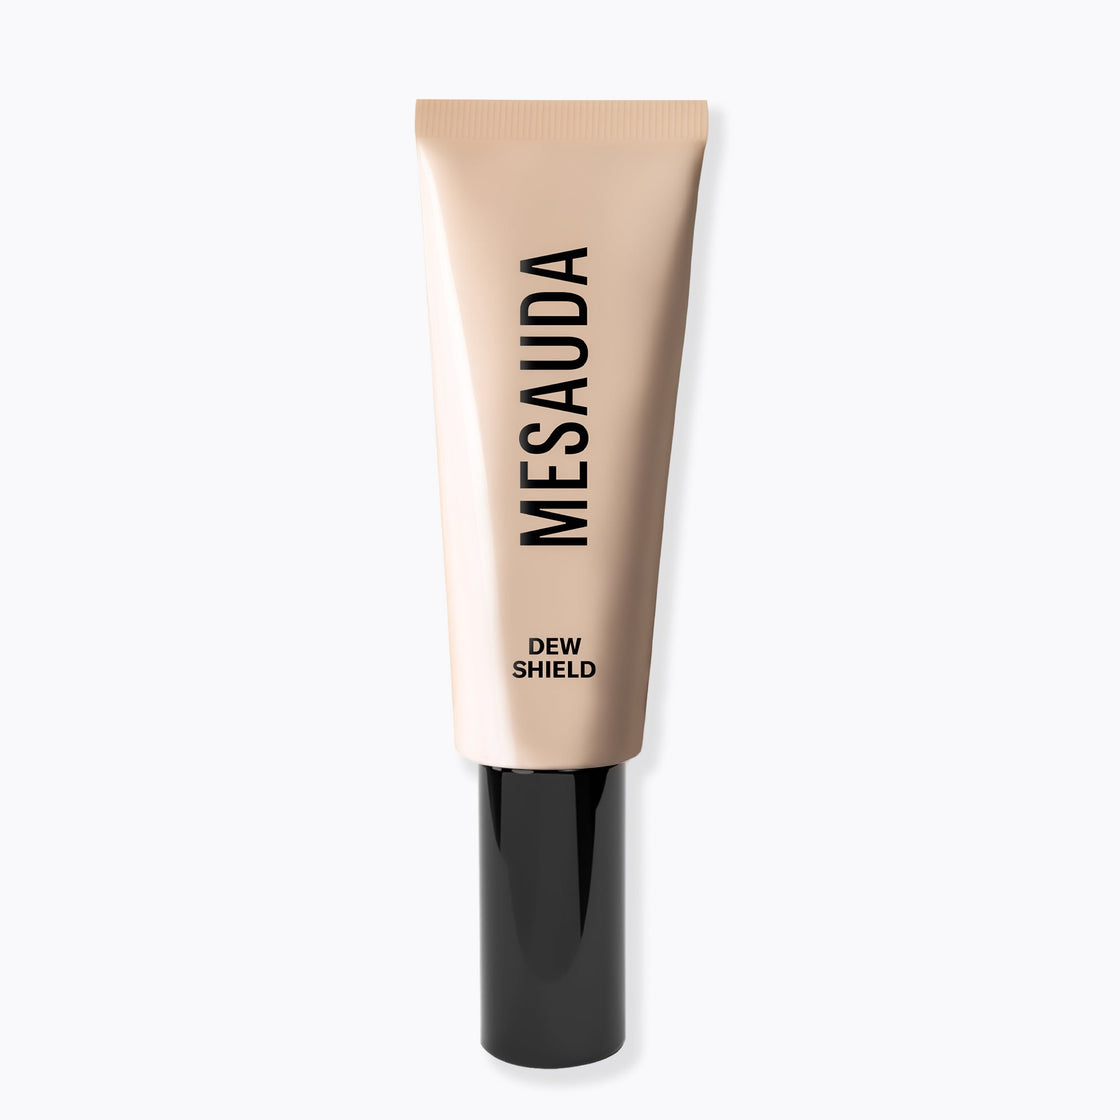 Mesauda DEW SHIELD BB tinted moisturizing and protective cream with SPF 20